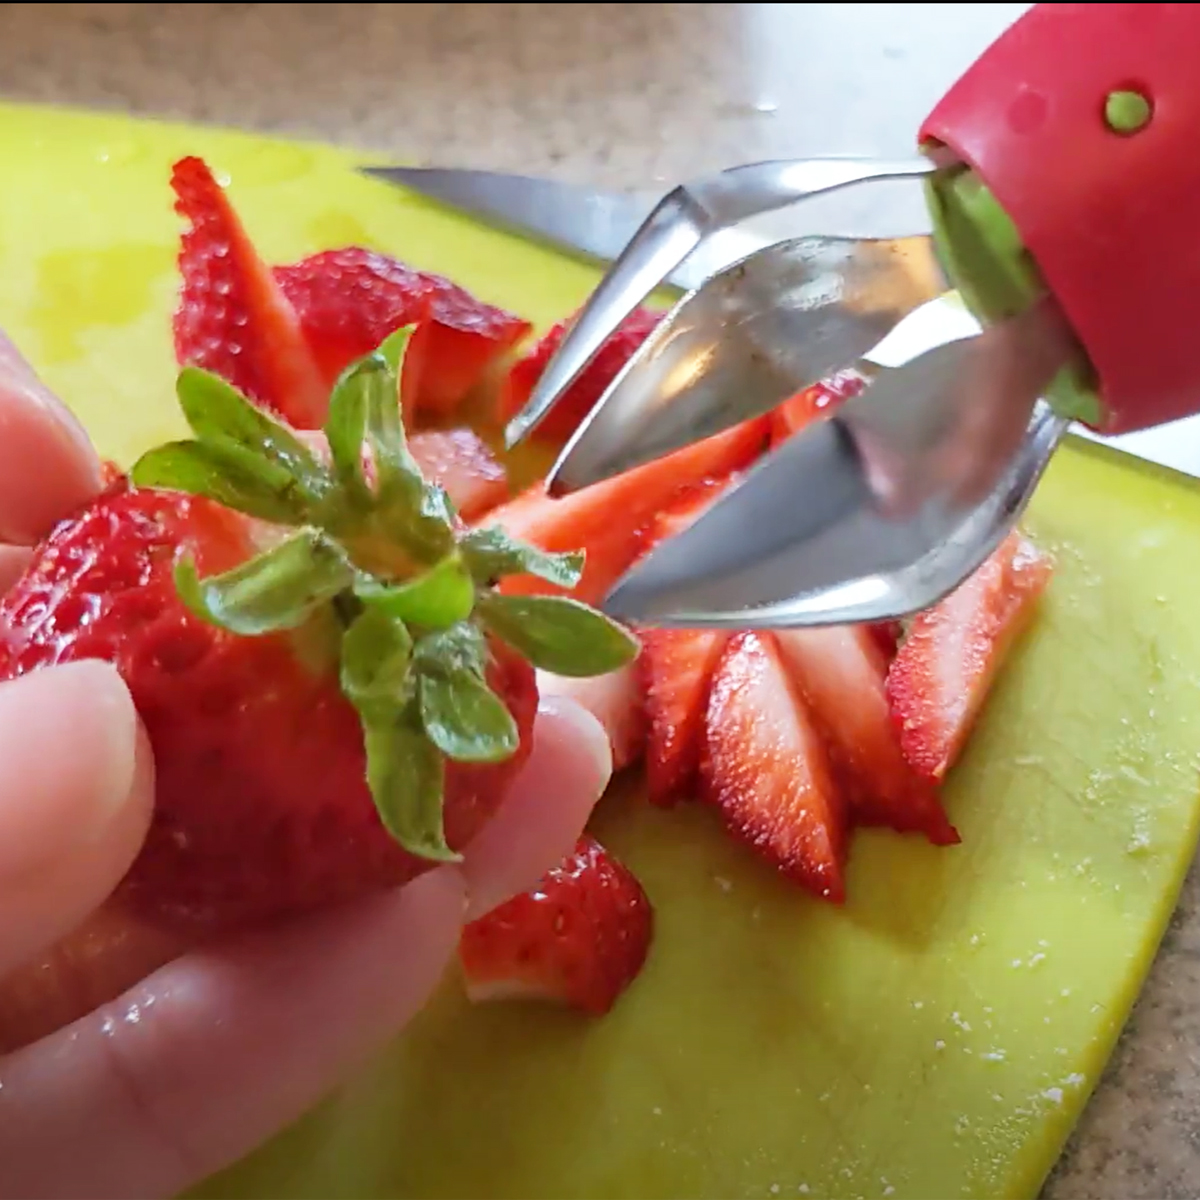 Using a Strawberry Huller